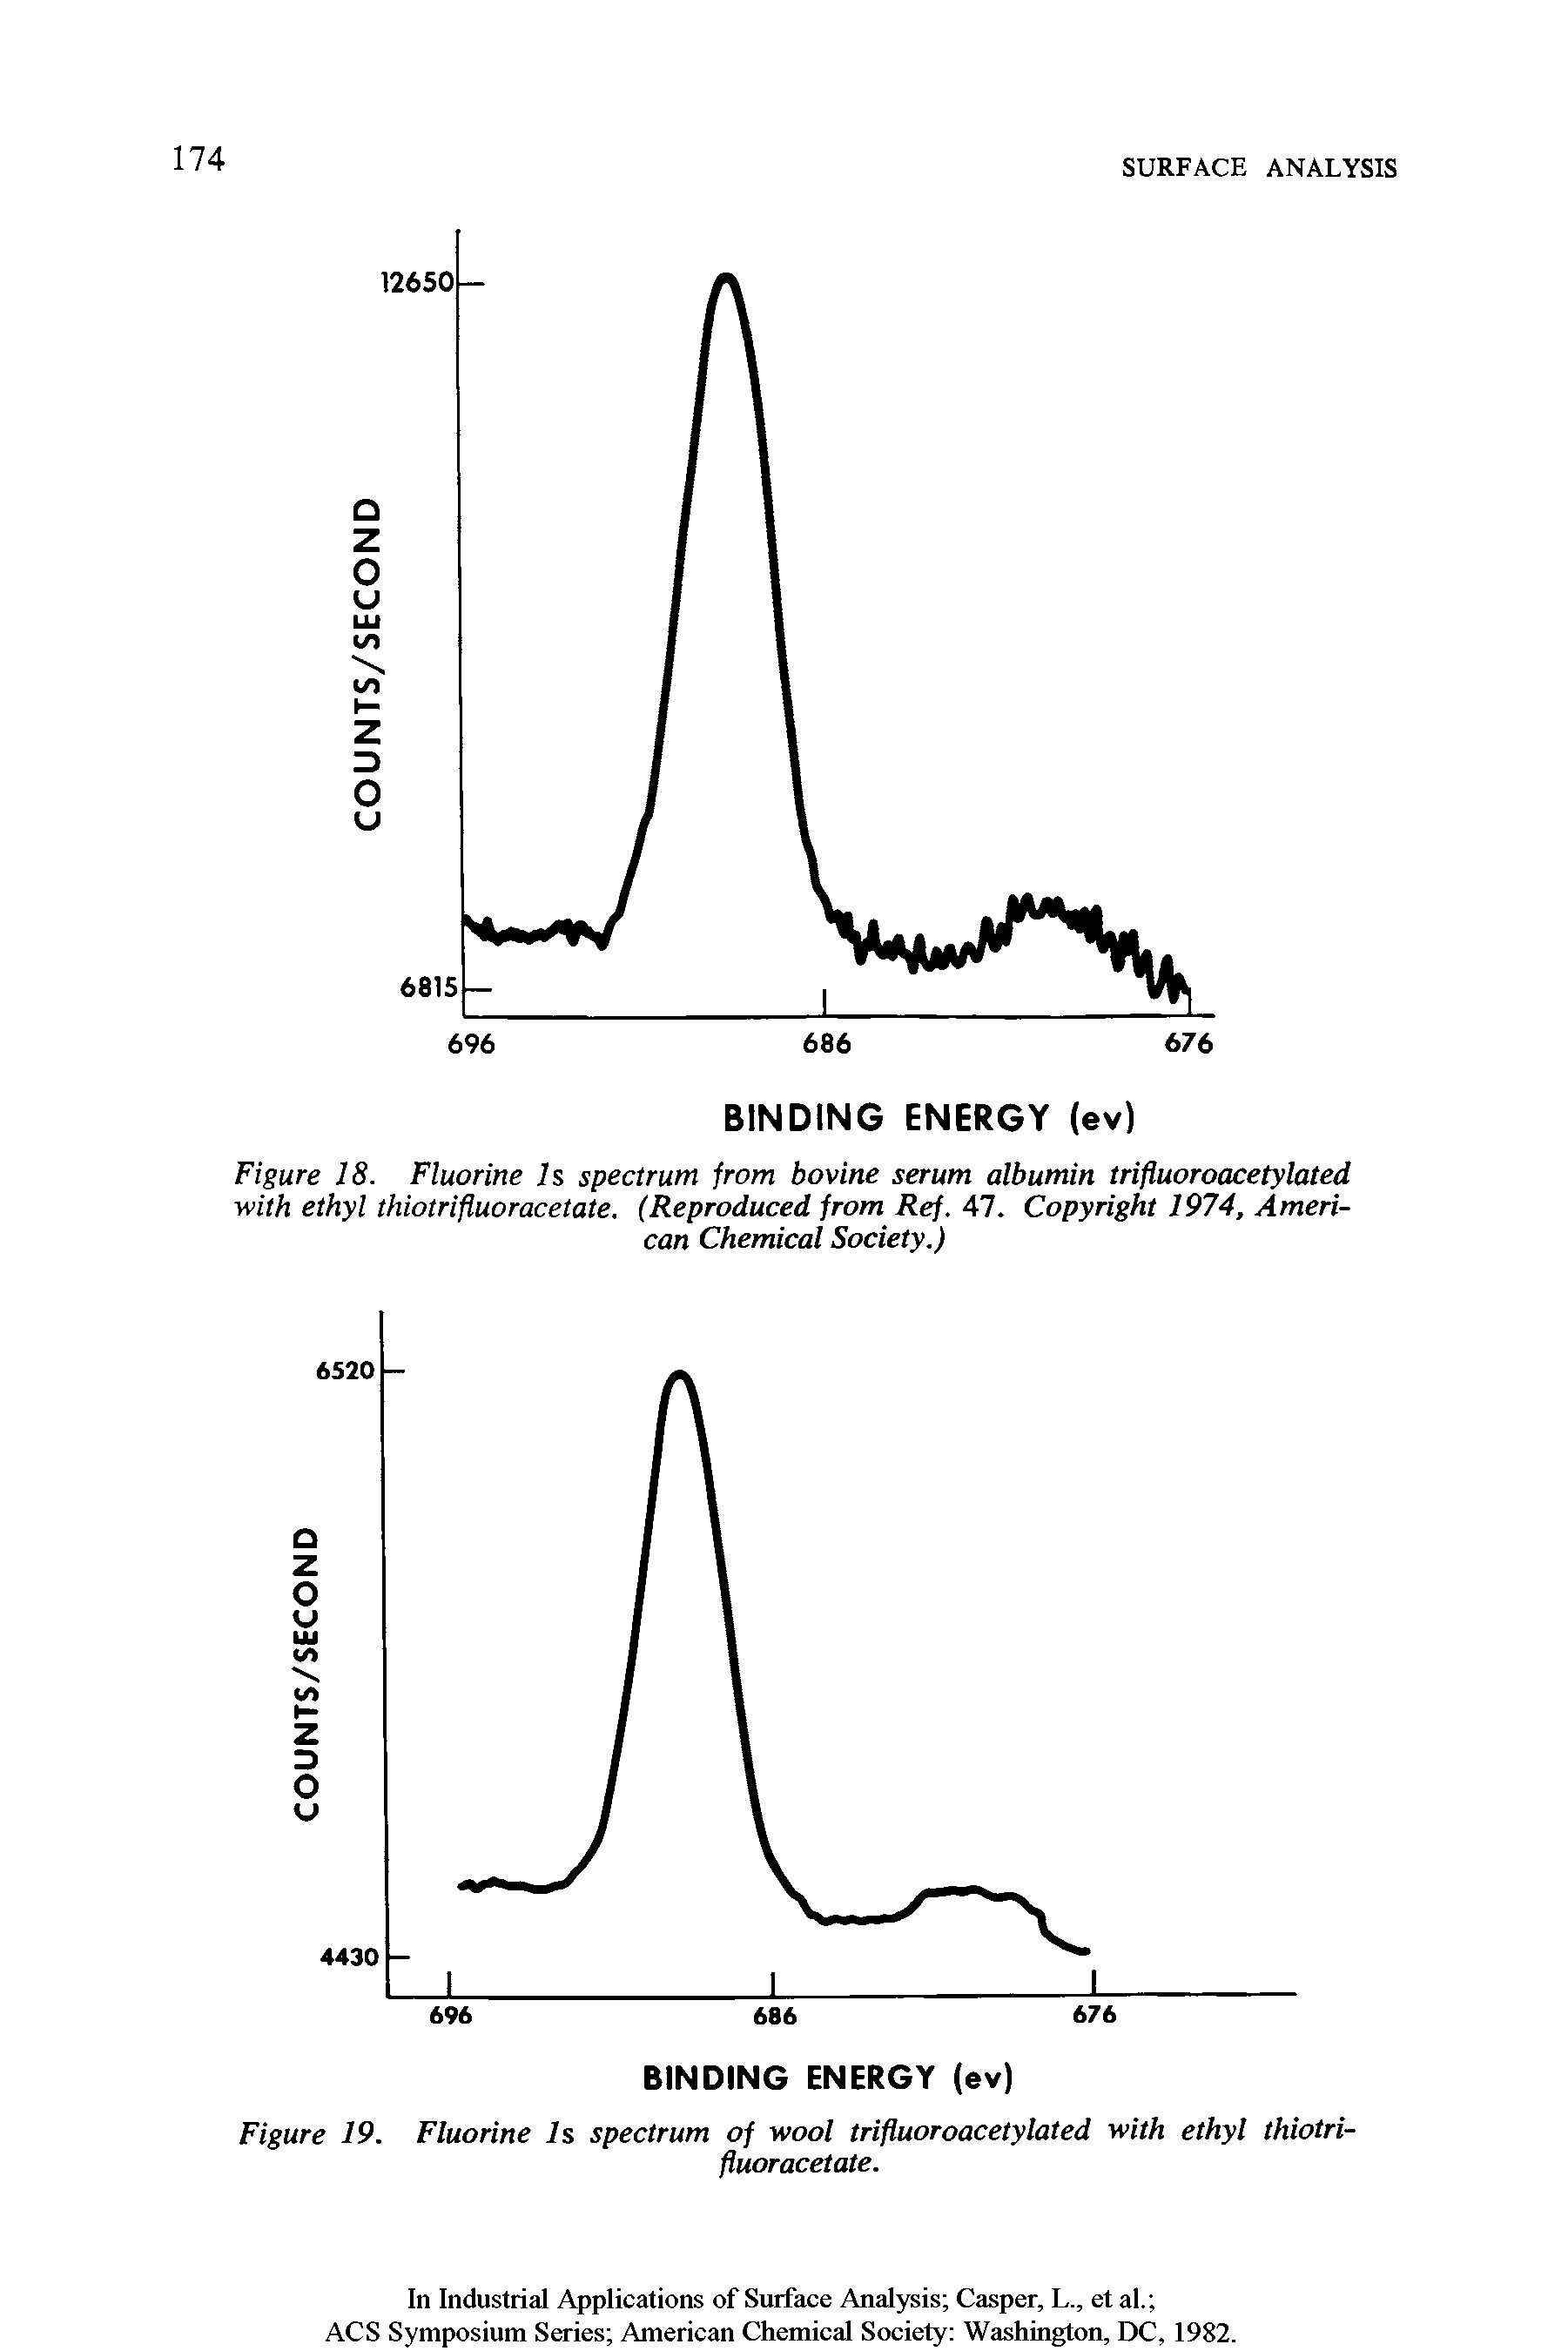 Figure 18. Fluorine Is spectrum from bovine serum albumin trifiuoroacetylated with ethyl thiotrifluoracetate. (Reproduced from Ref. 47. Copyright 1974, American Chemical Society.)...